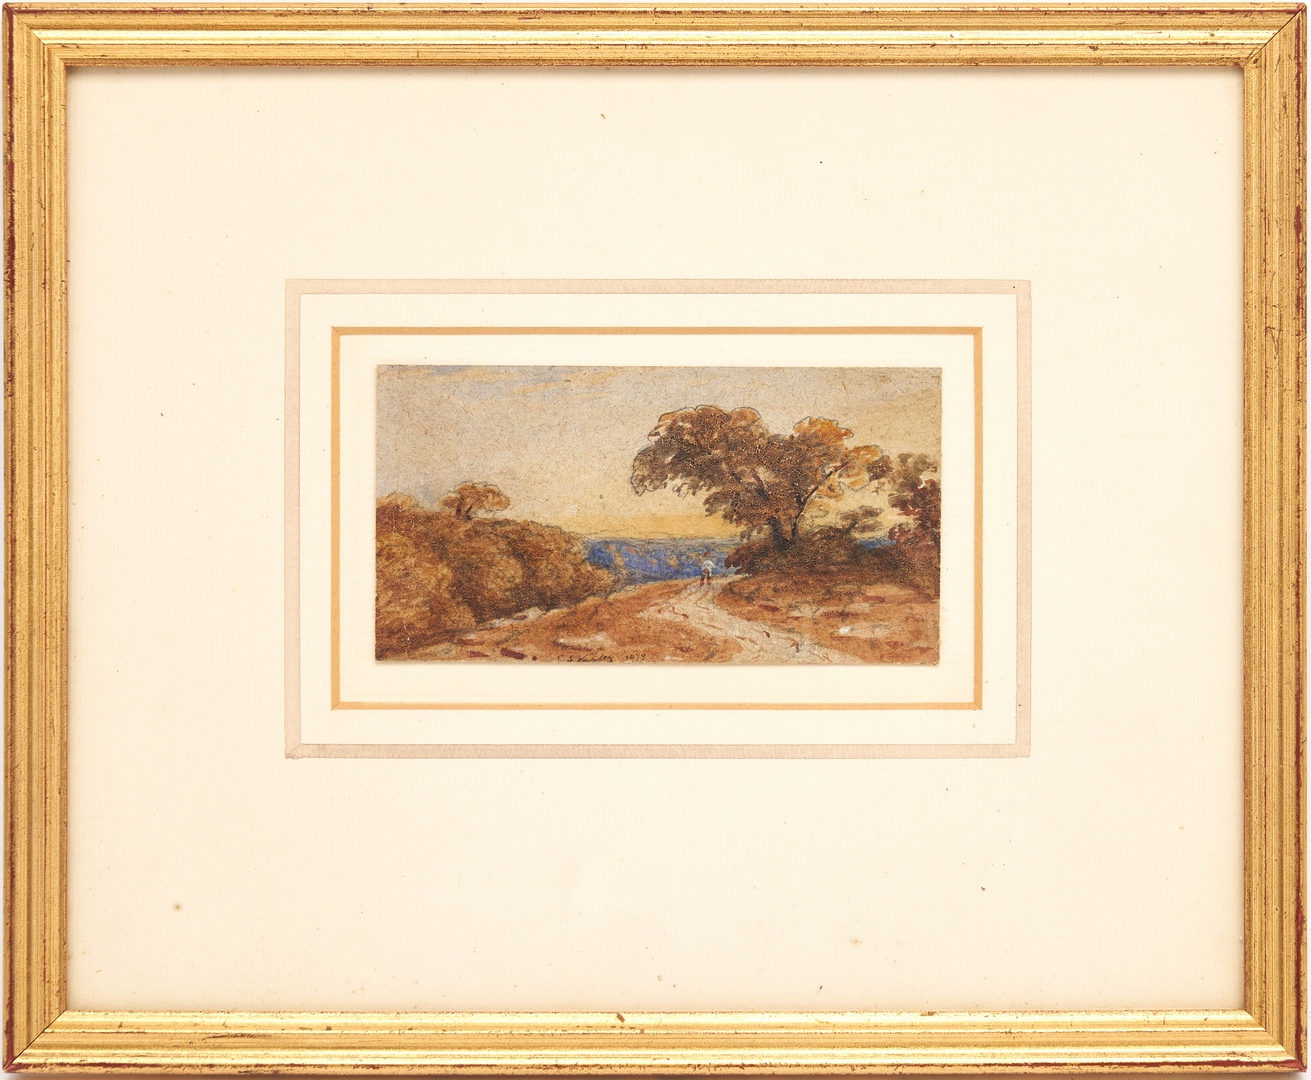 Lot 455: Charles Smith Varley W/C, Wooded Landscape with Figure in the Distance